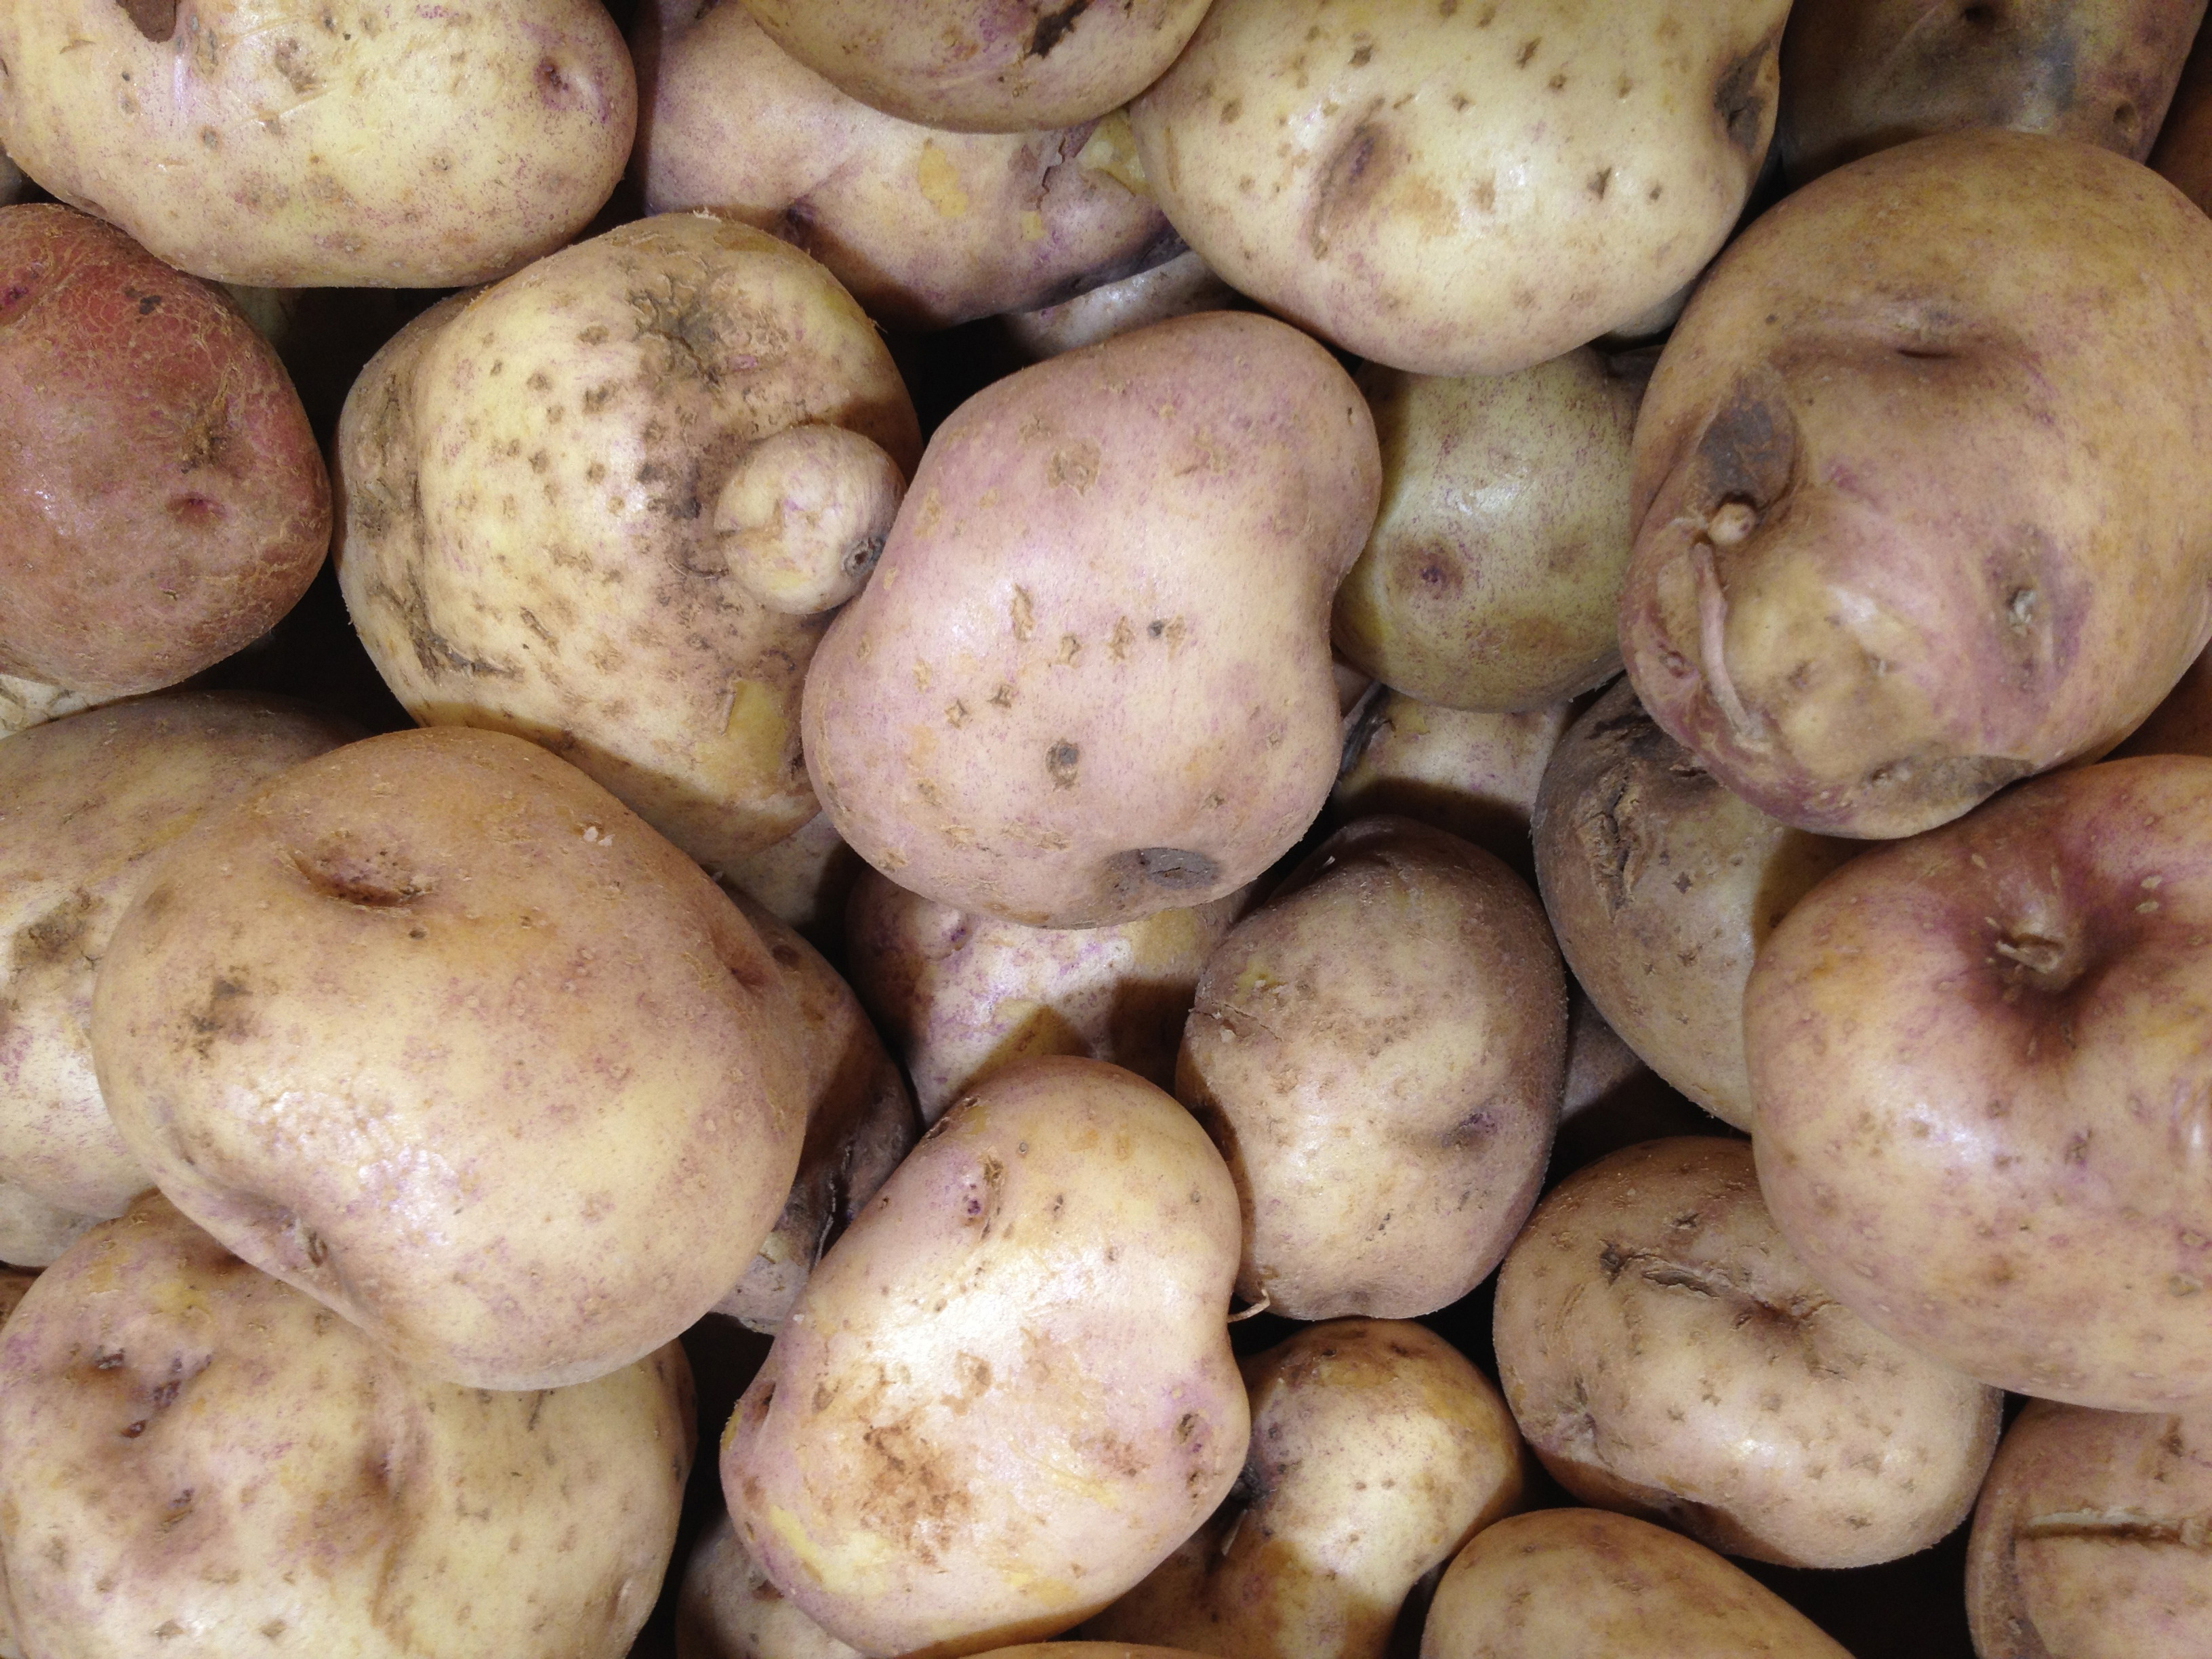 Why You Should Grow No-Dig Potatoes - Growing with Nature